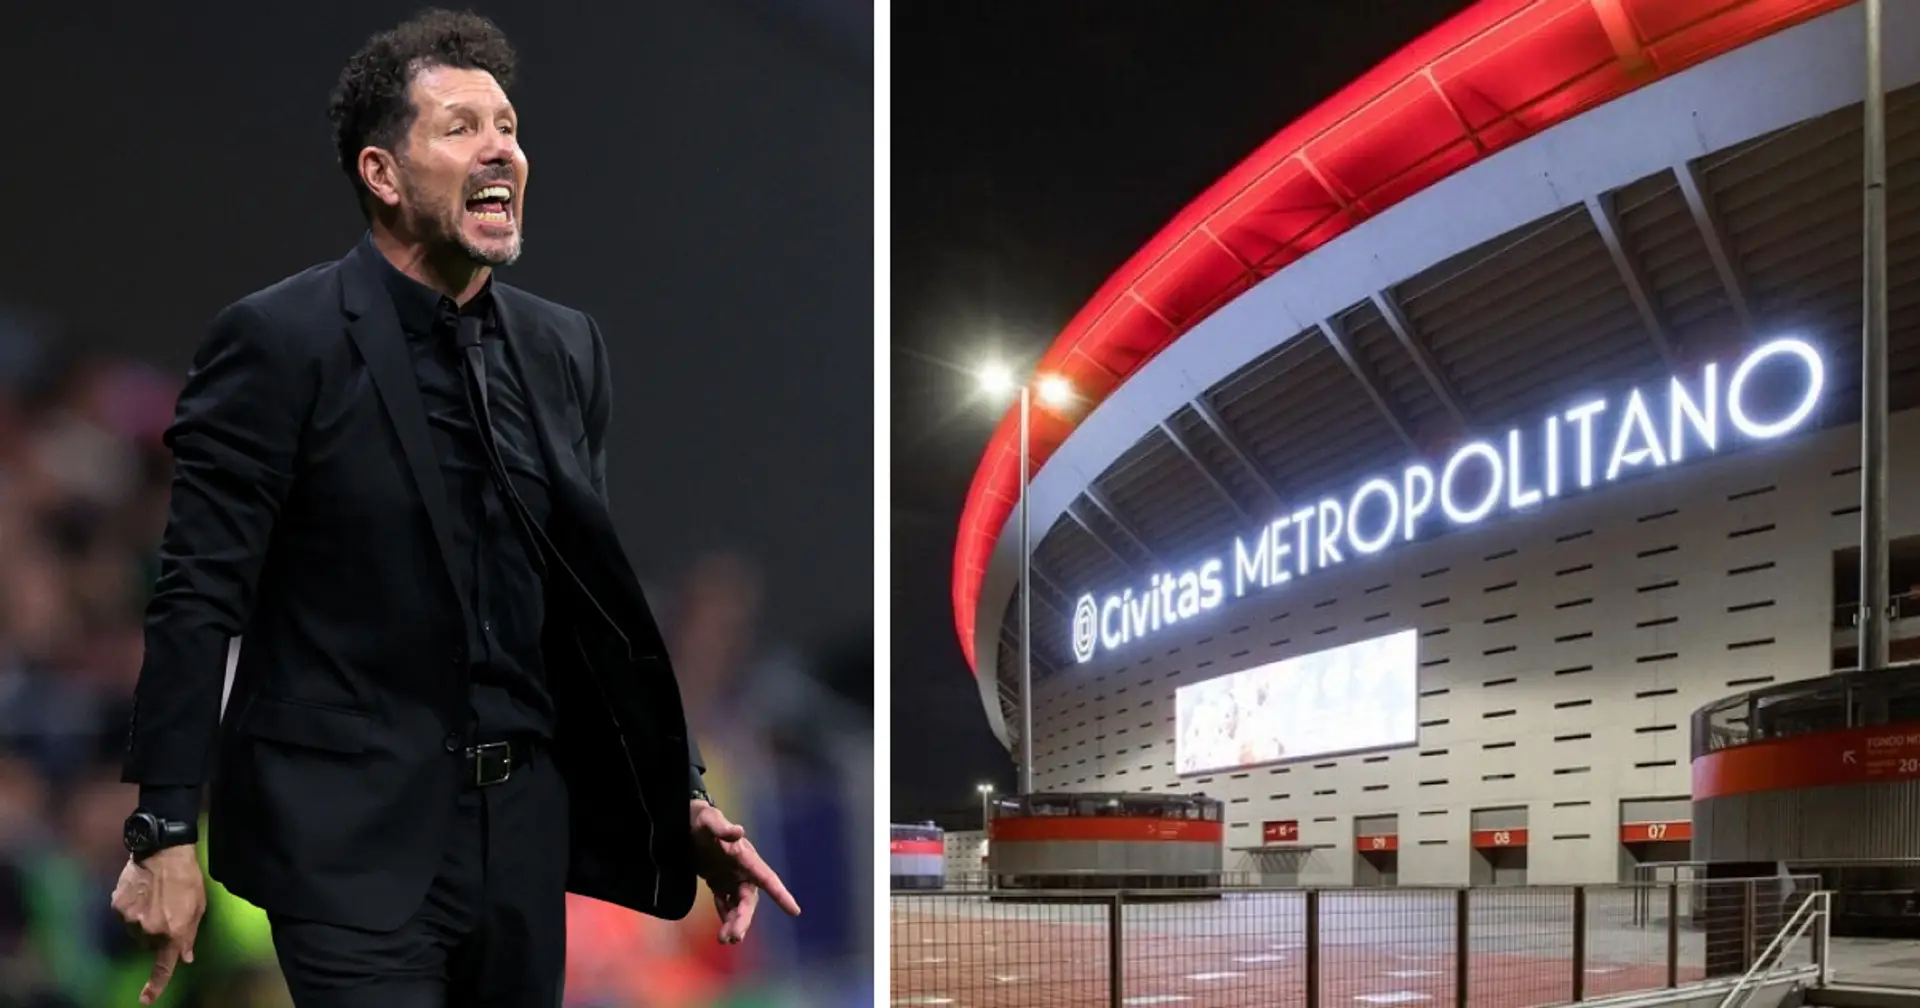 Atletico Madrid hold insane home record under Diego Simeone in Champions League knockout stages